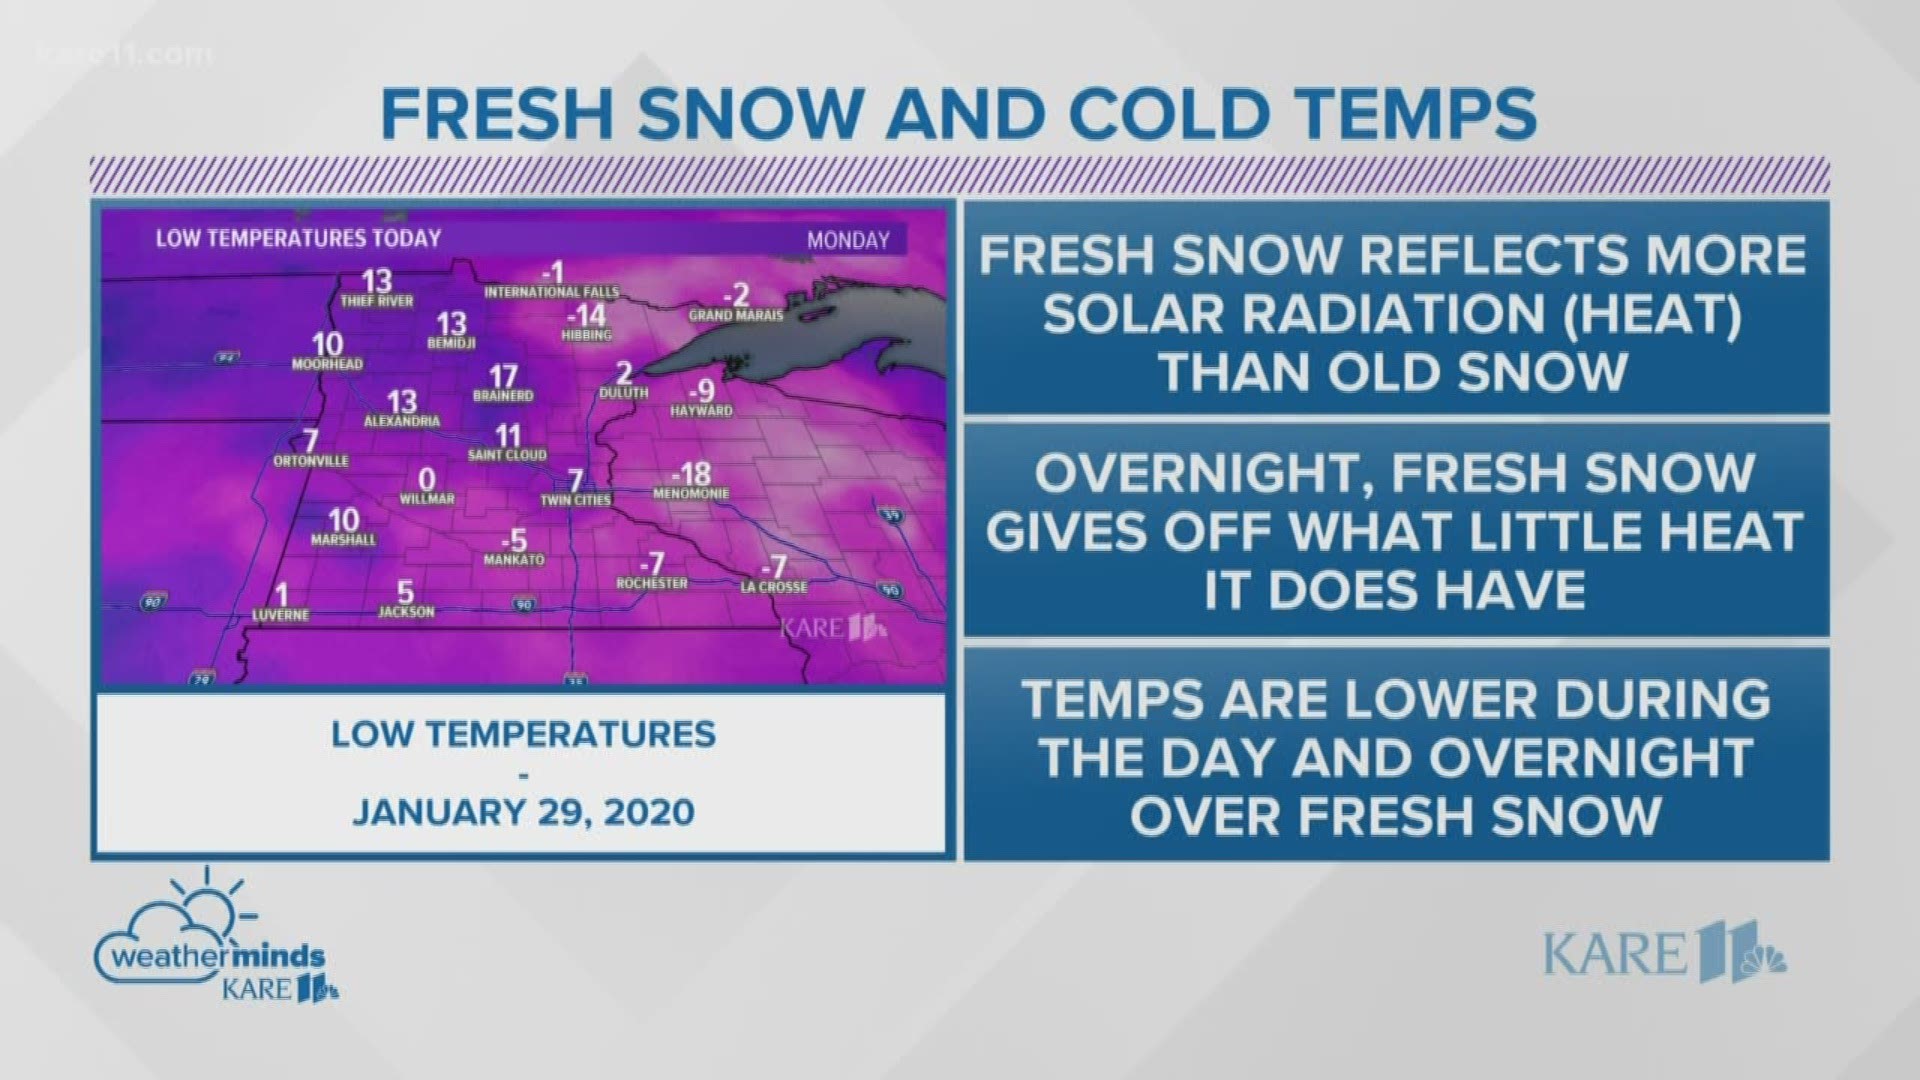 WeatherMinds: Colder temps where fresh snow fell